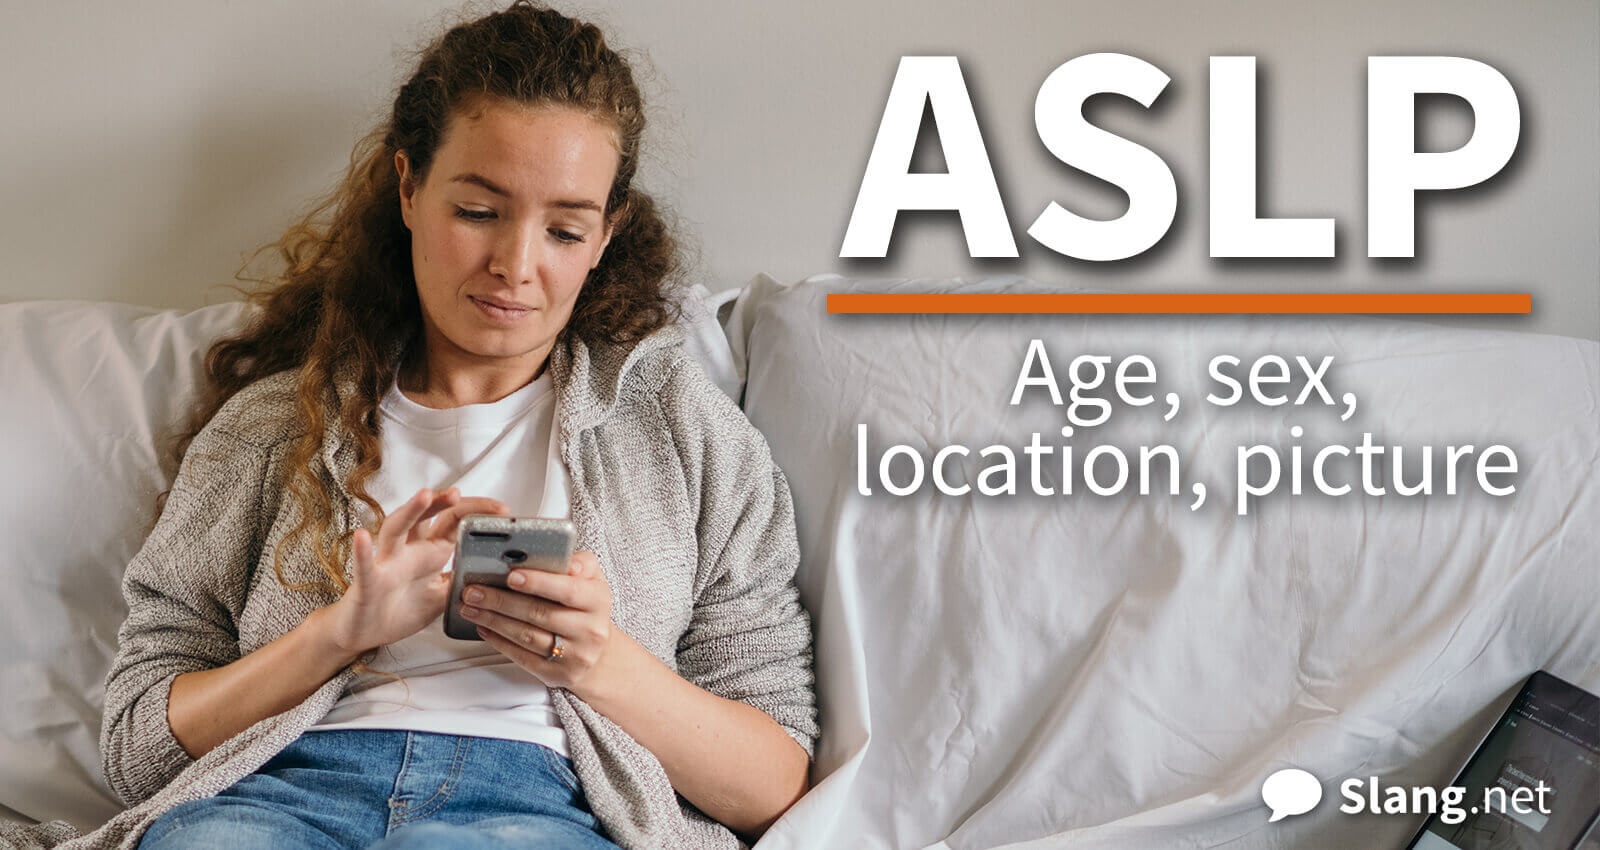 Receiving ASLP means they want you to send your age, sex, location, and a picture of yourself